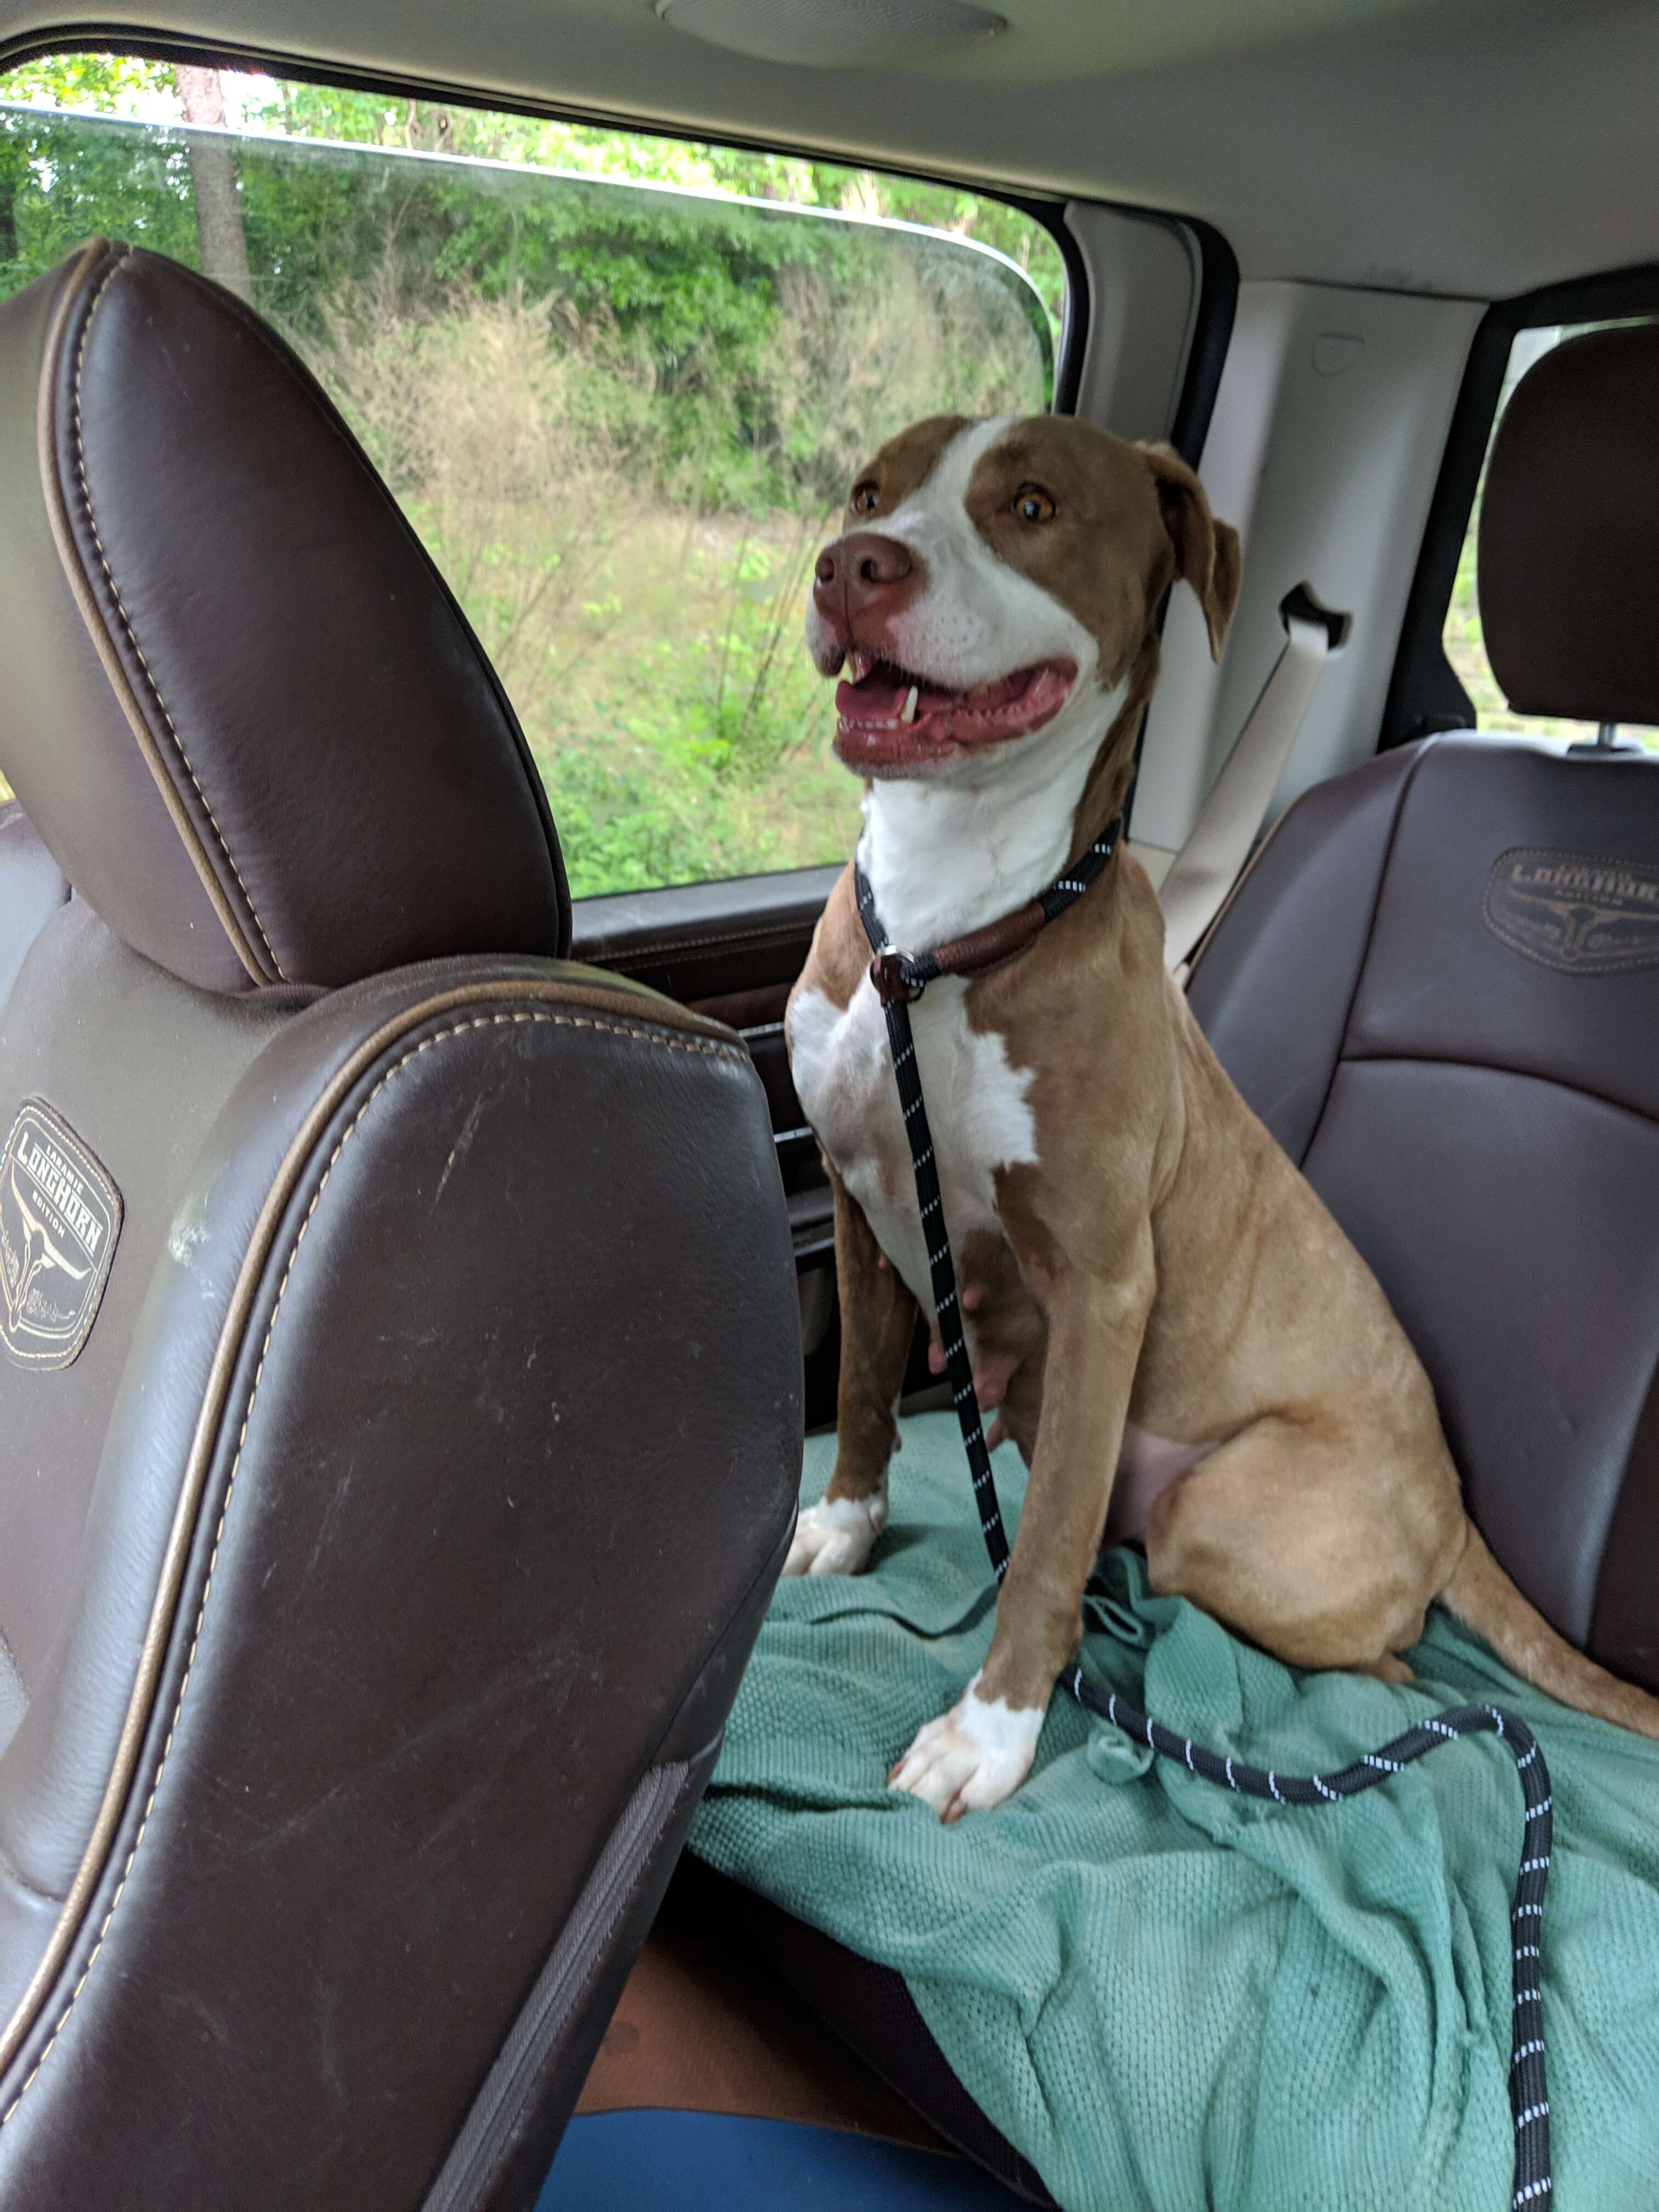 Foster pit bull on freedom ride out of shelter